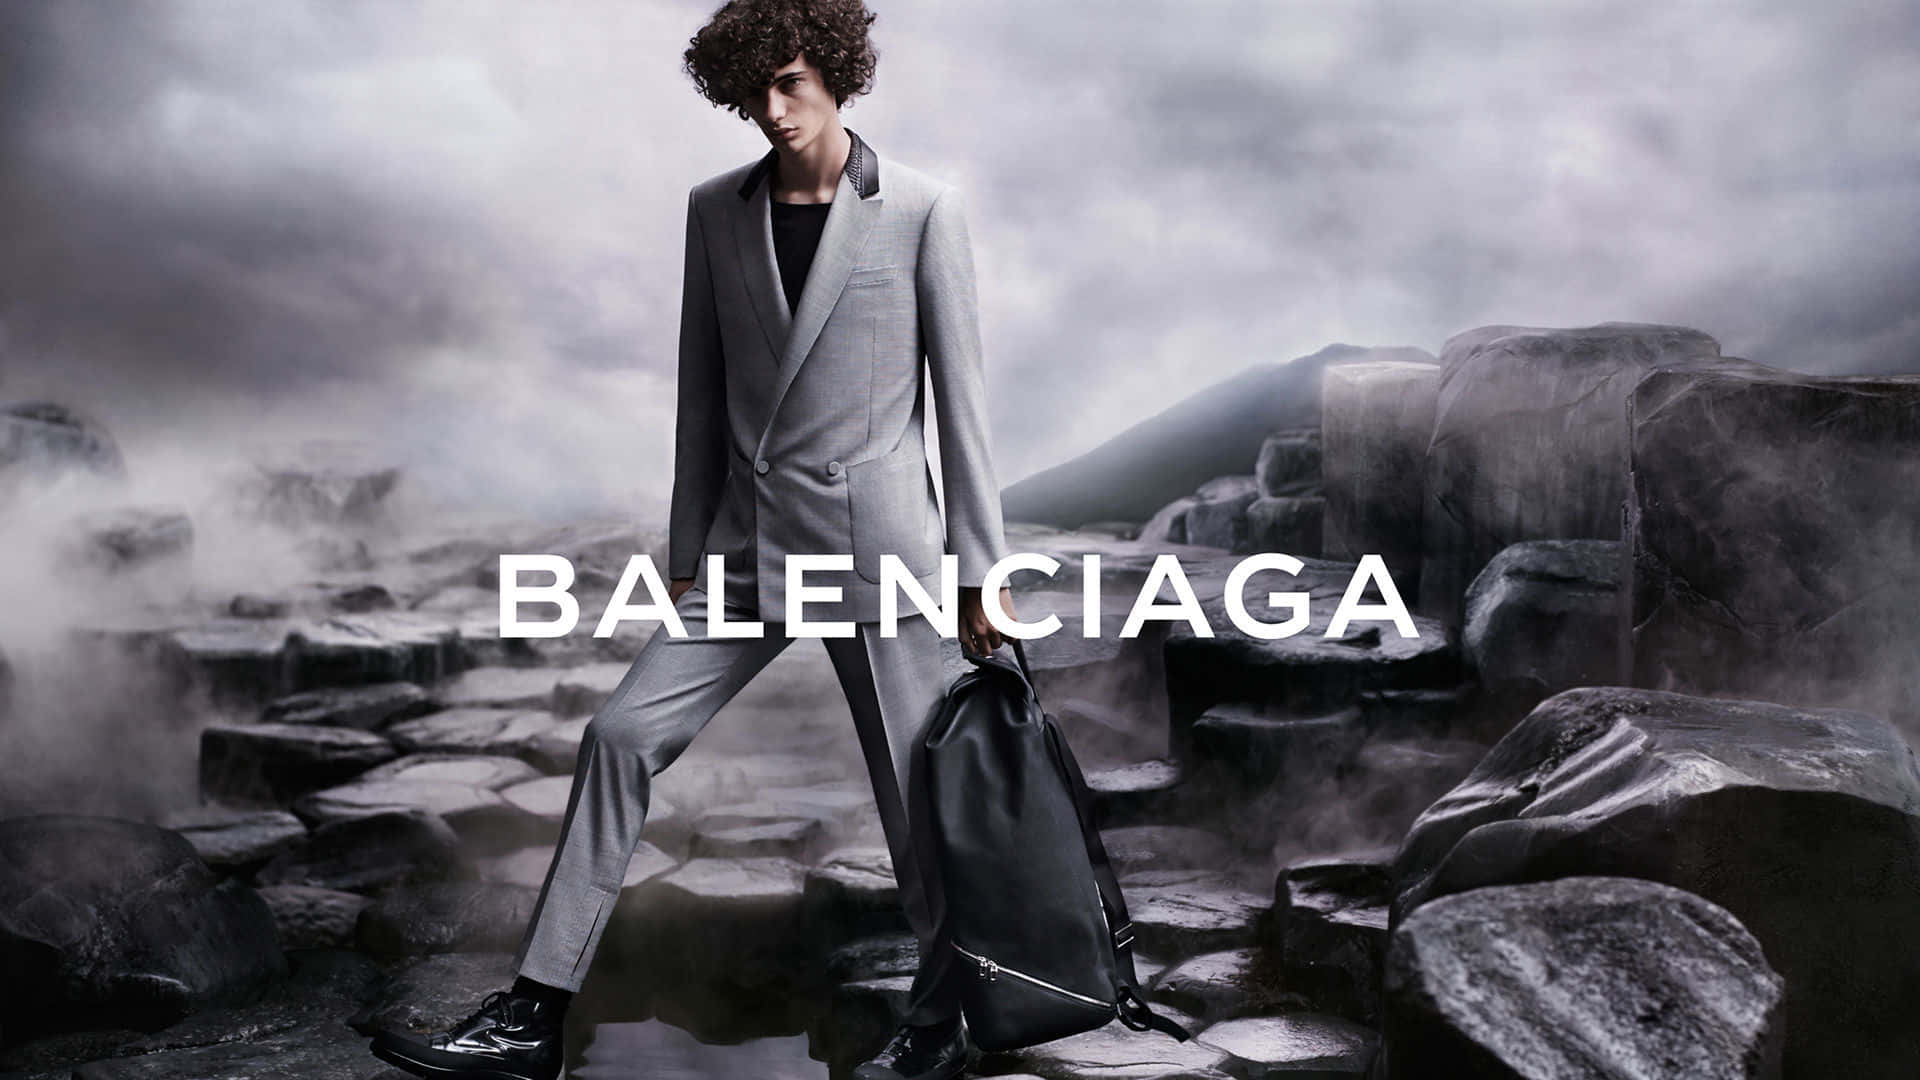 Step up your street style game with Balenciaga